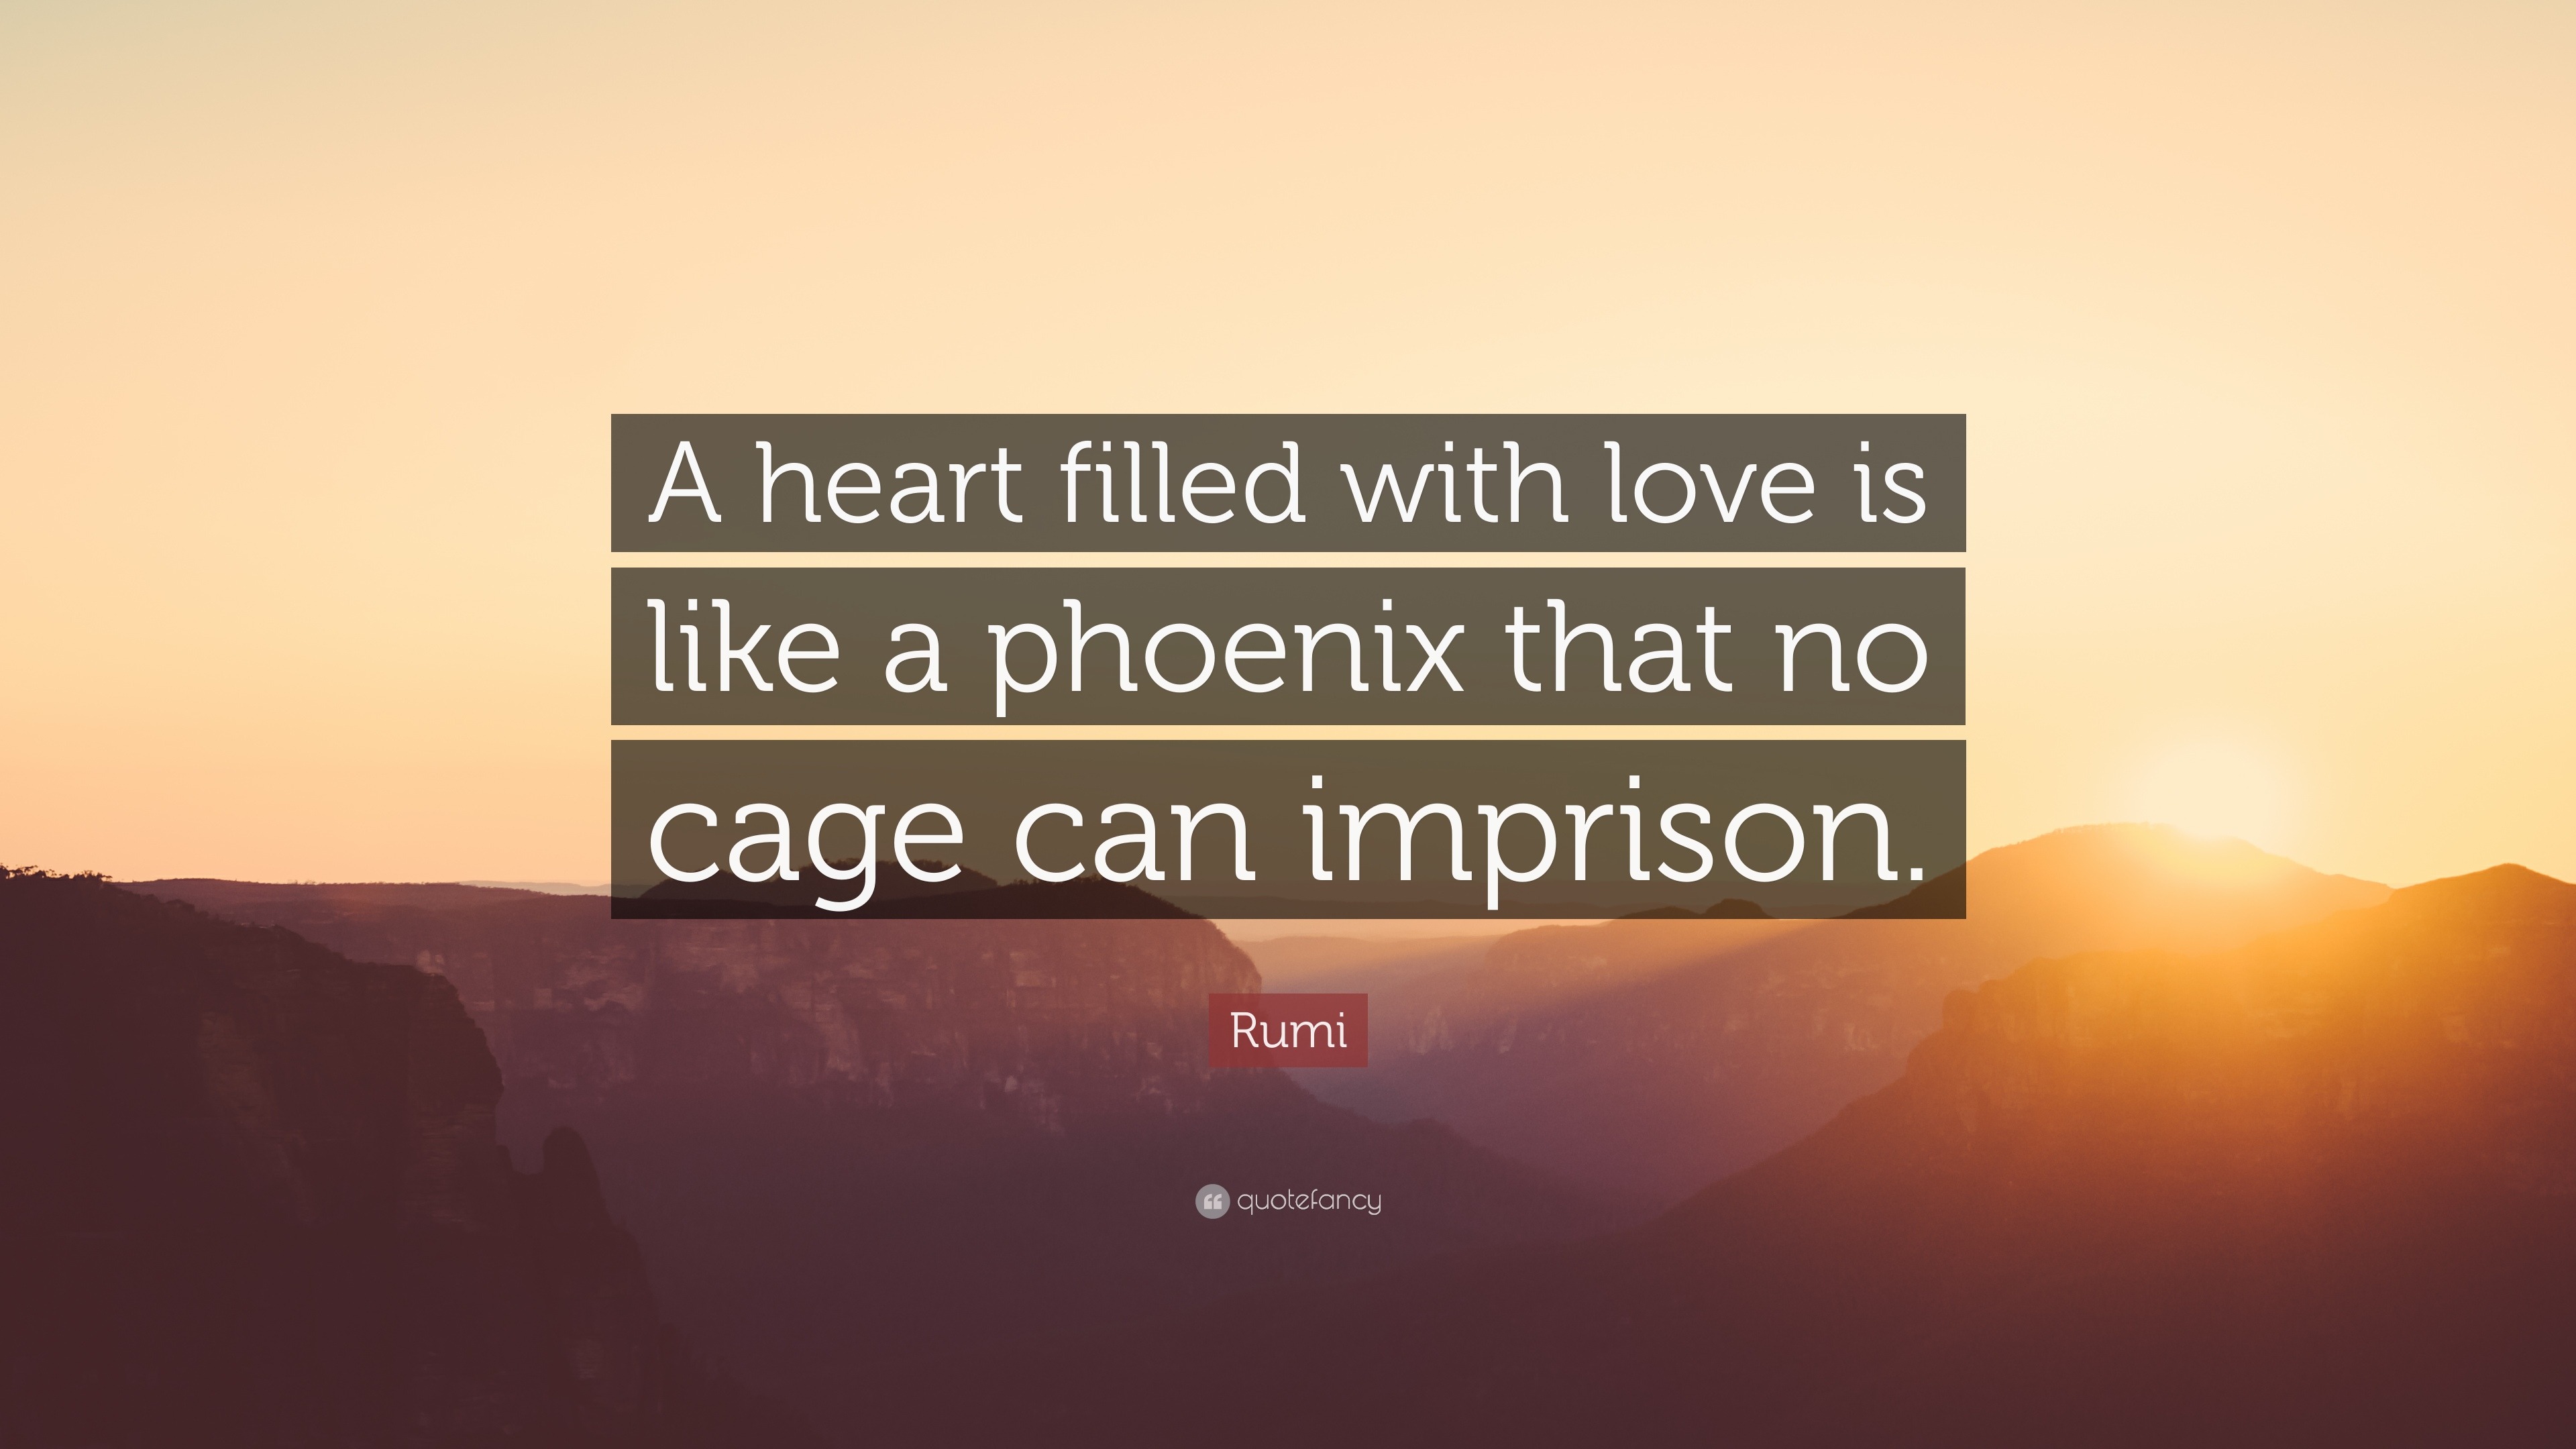 Rumi Quote “A heart filled with love is like a phoenix that no cage